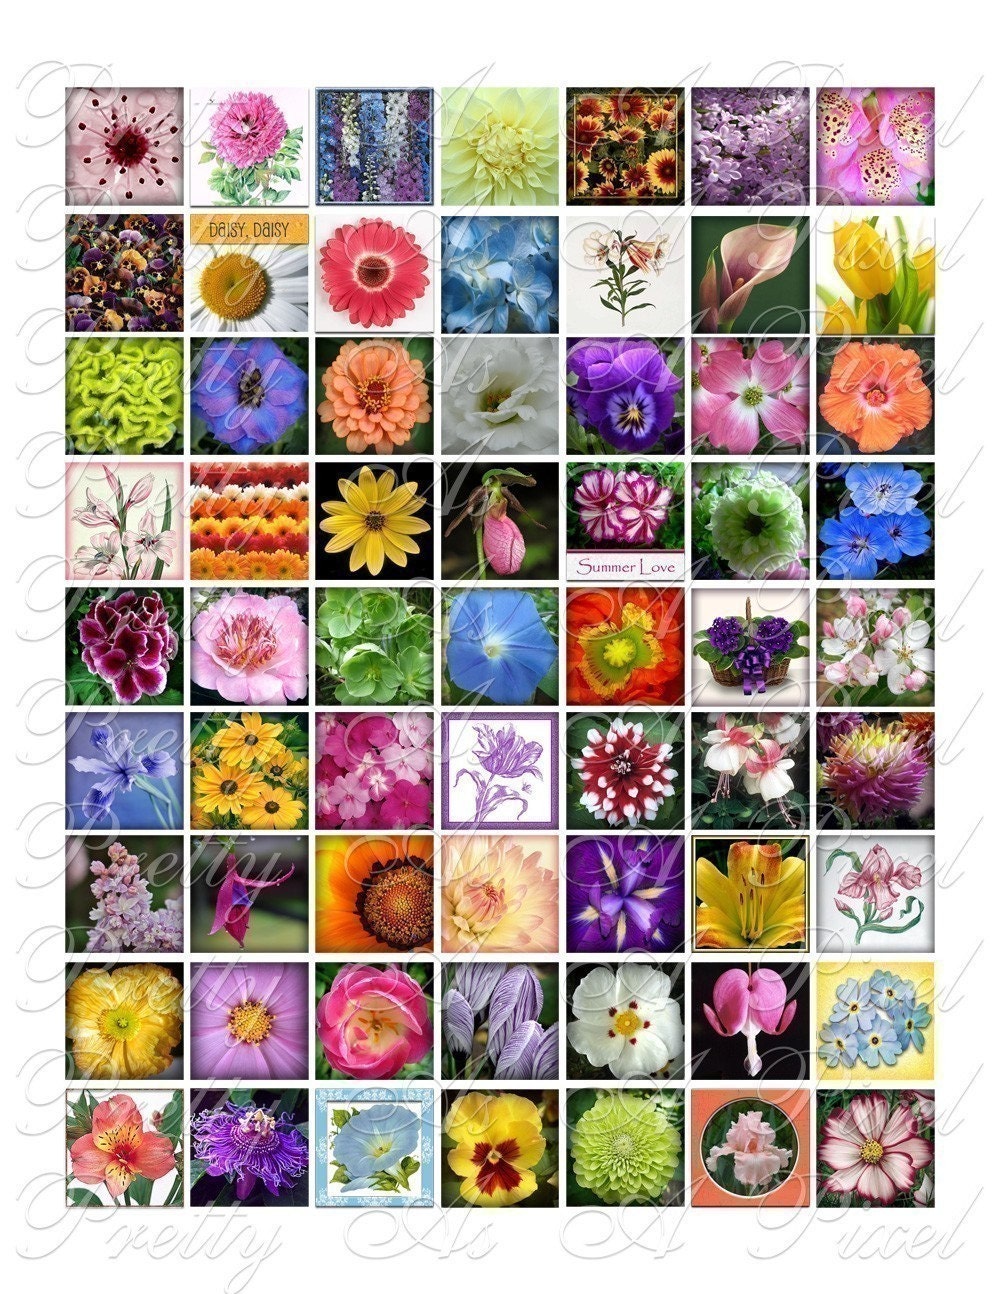 Flowers from Your Garden Digital Collage Sheet 3 sizes